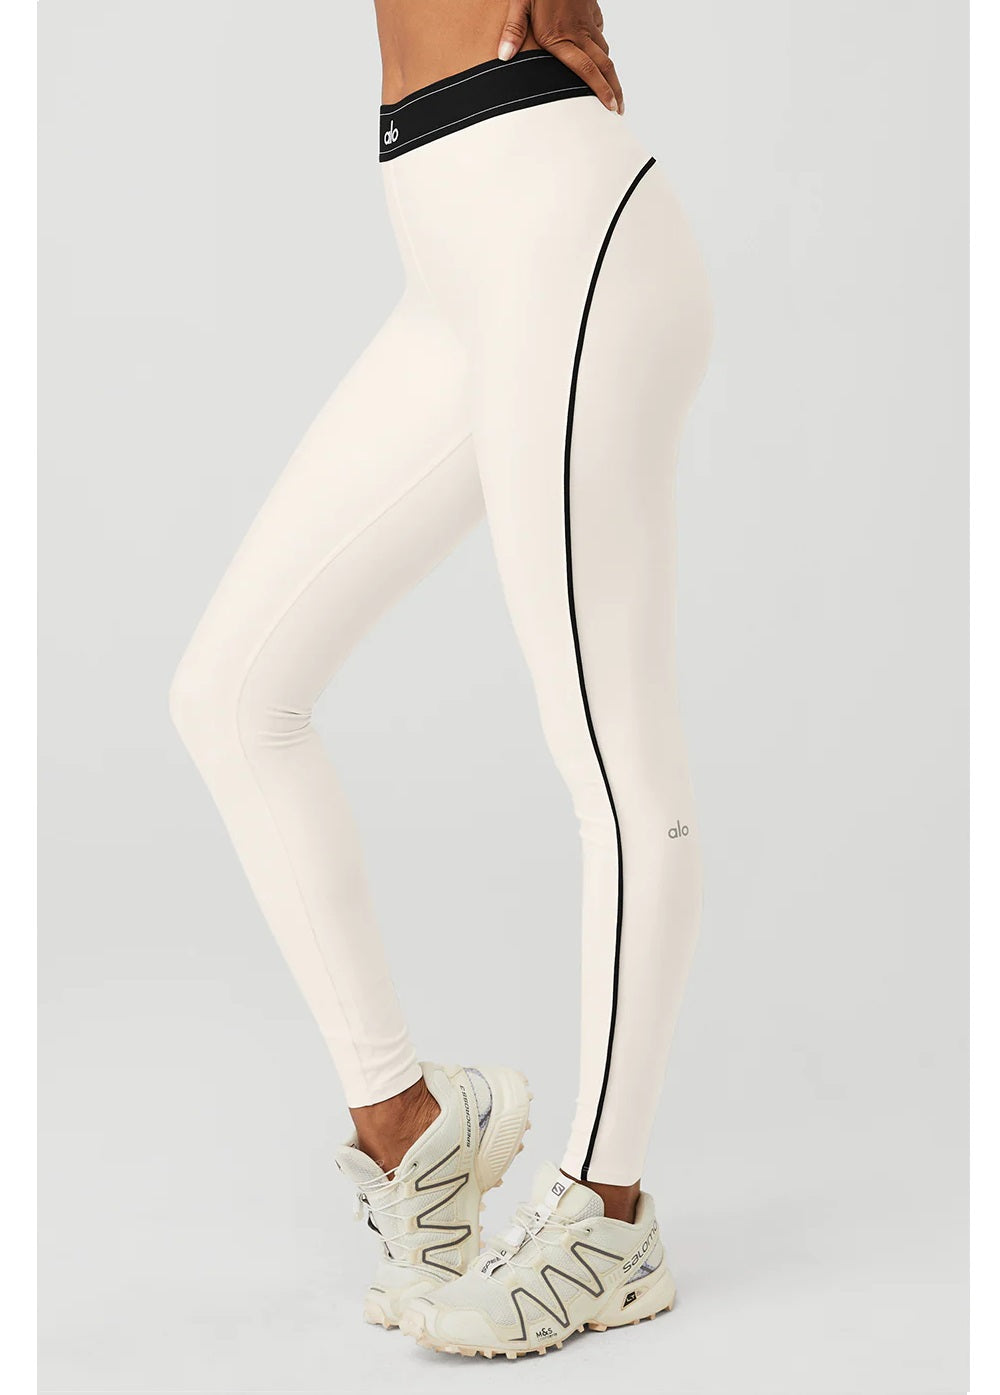 in USA store ALO Yoga Women's “Airlift High-Wais” Suit Up Legging